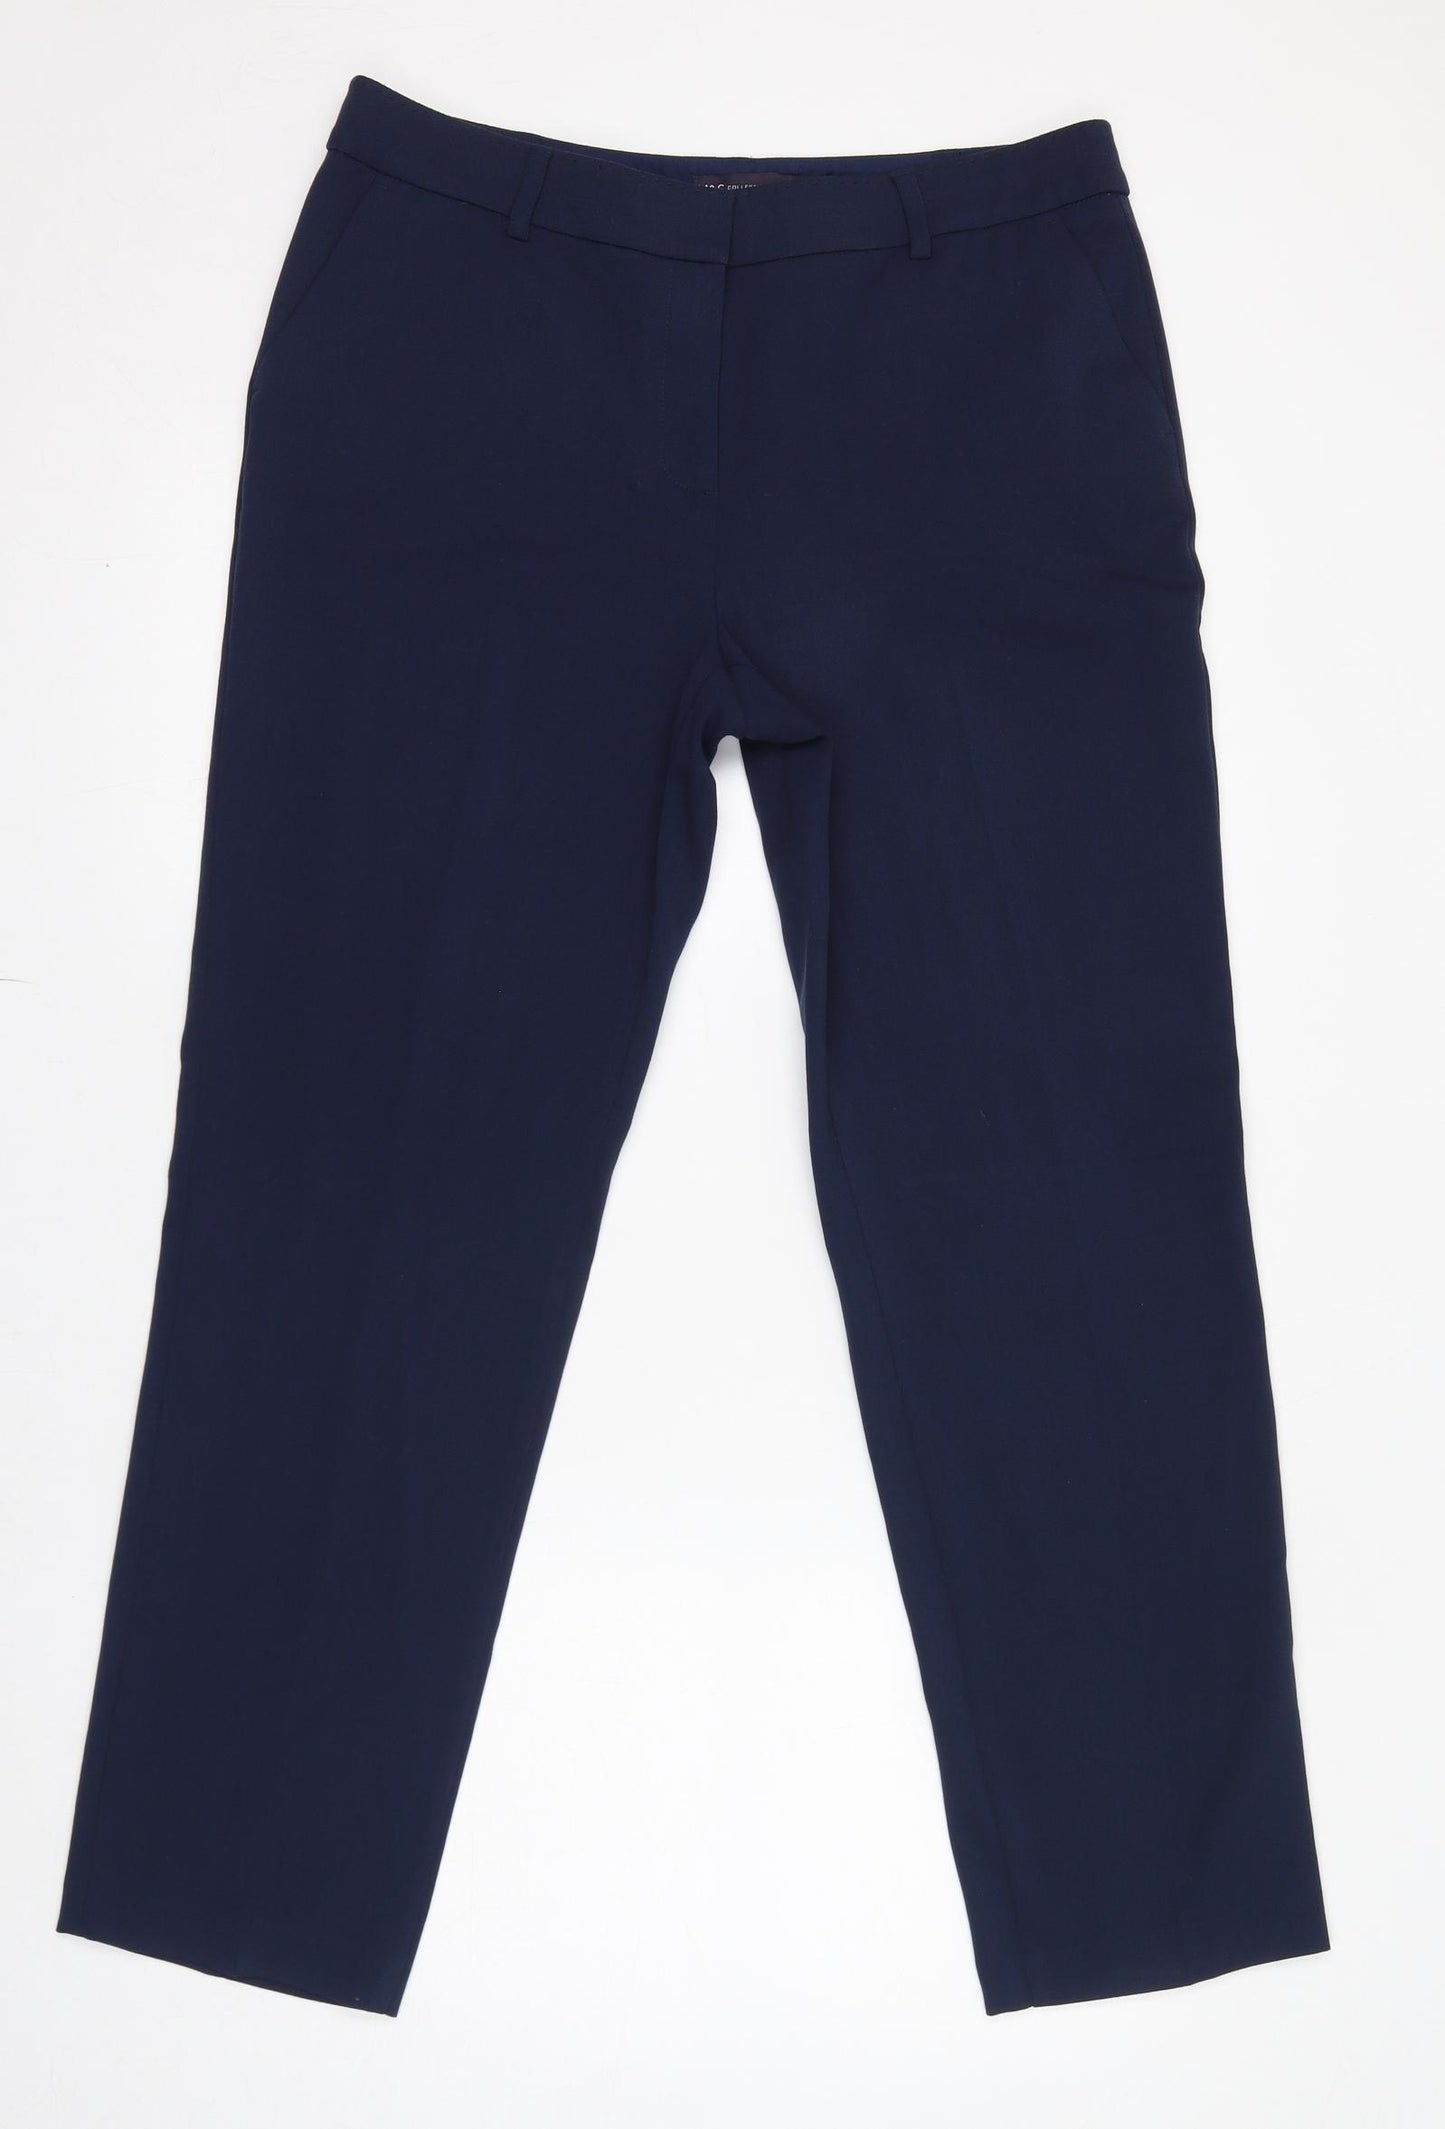 Marks and Spencer Womens Blue Polyester Dress Pants Trousers Size 14 L30 in Regular Zip